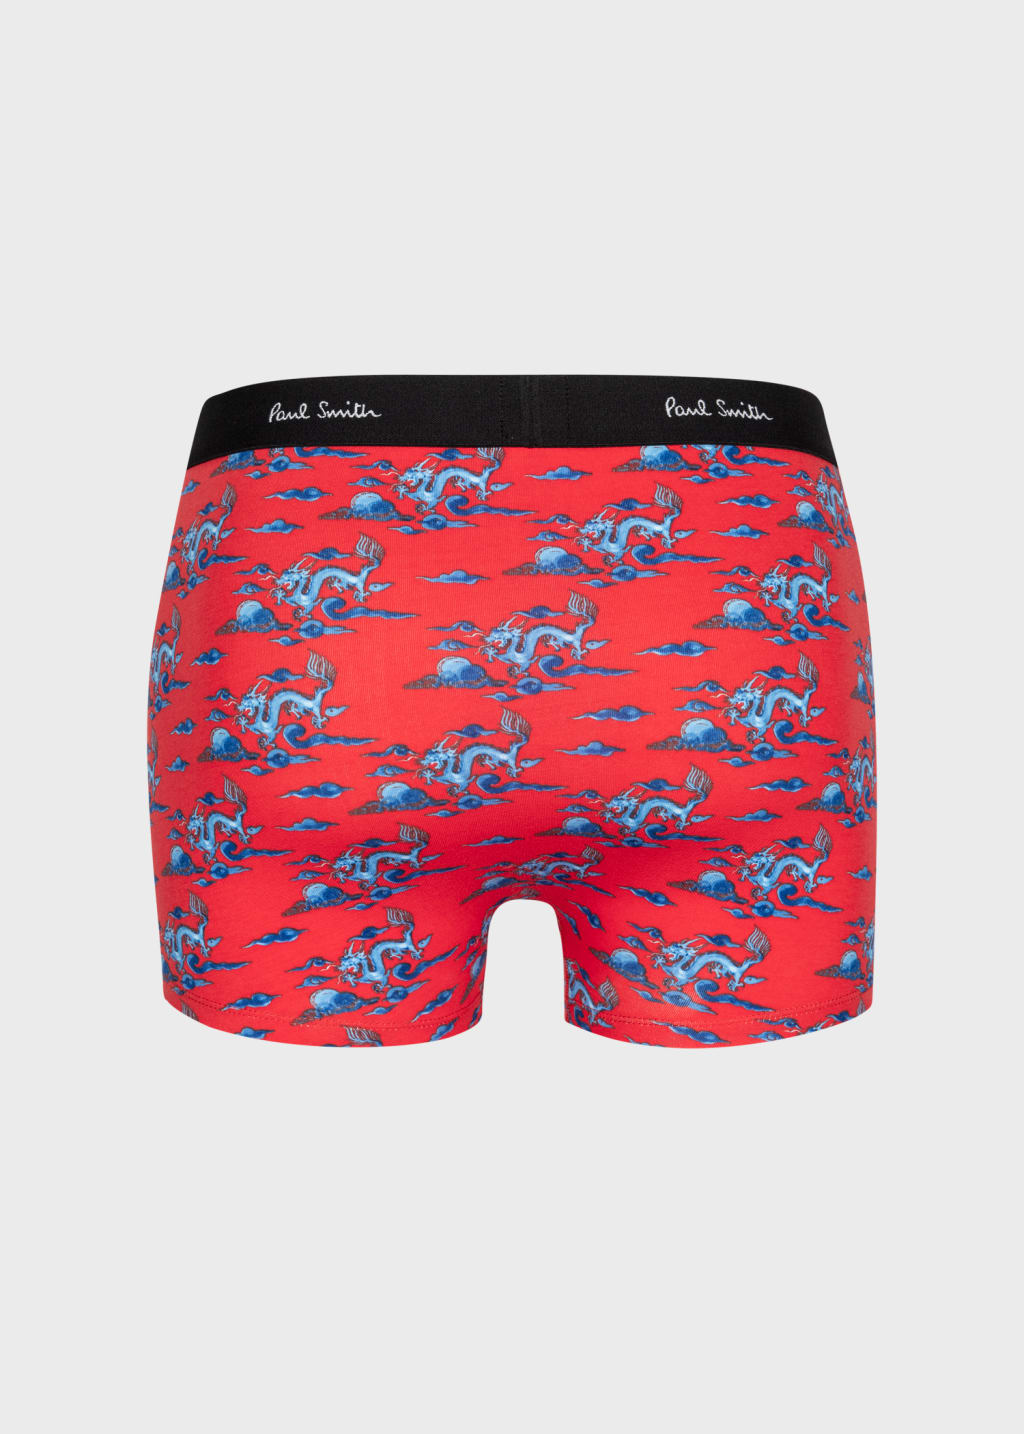 Detail View - Red 'Year Of The Dragon' Boxer Briefs Paul Smith